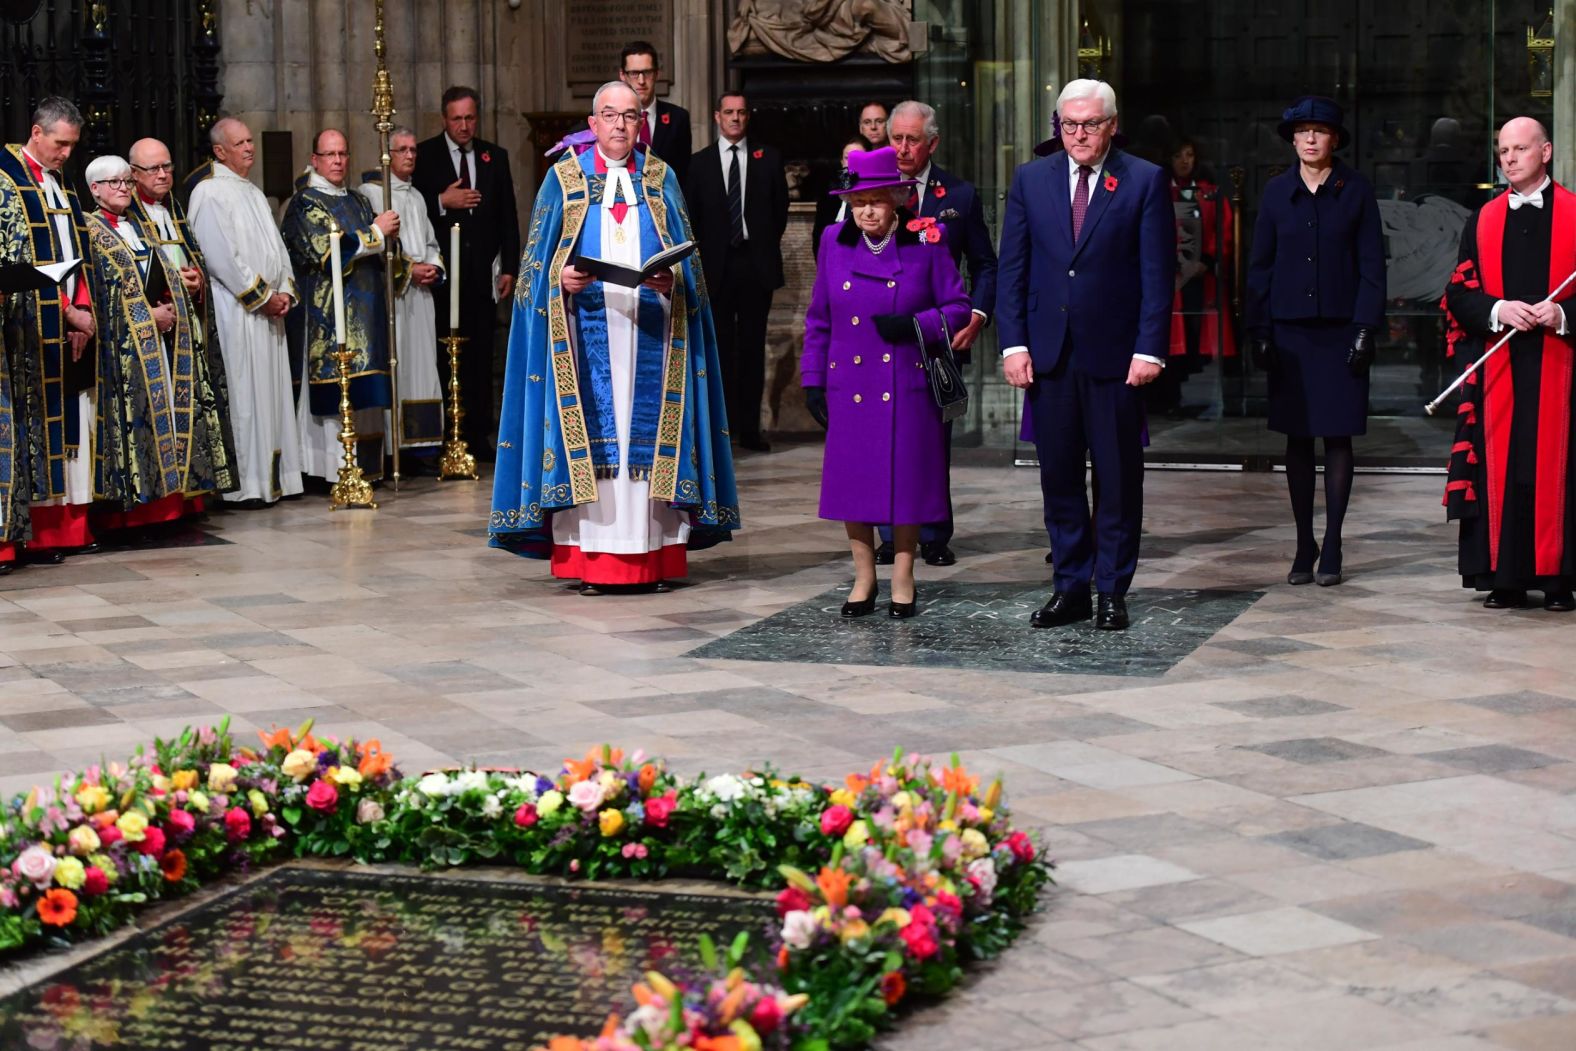 Queen Elizabeth II and German President Frank-Walter Steinmeier stand in front of the grave of the unknown warrior as they attend a service marking the armistice at Westminster Abbey on Sunday in London.